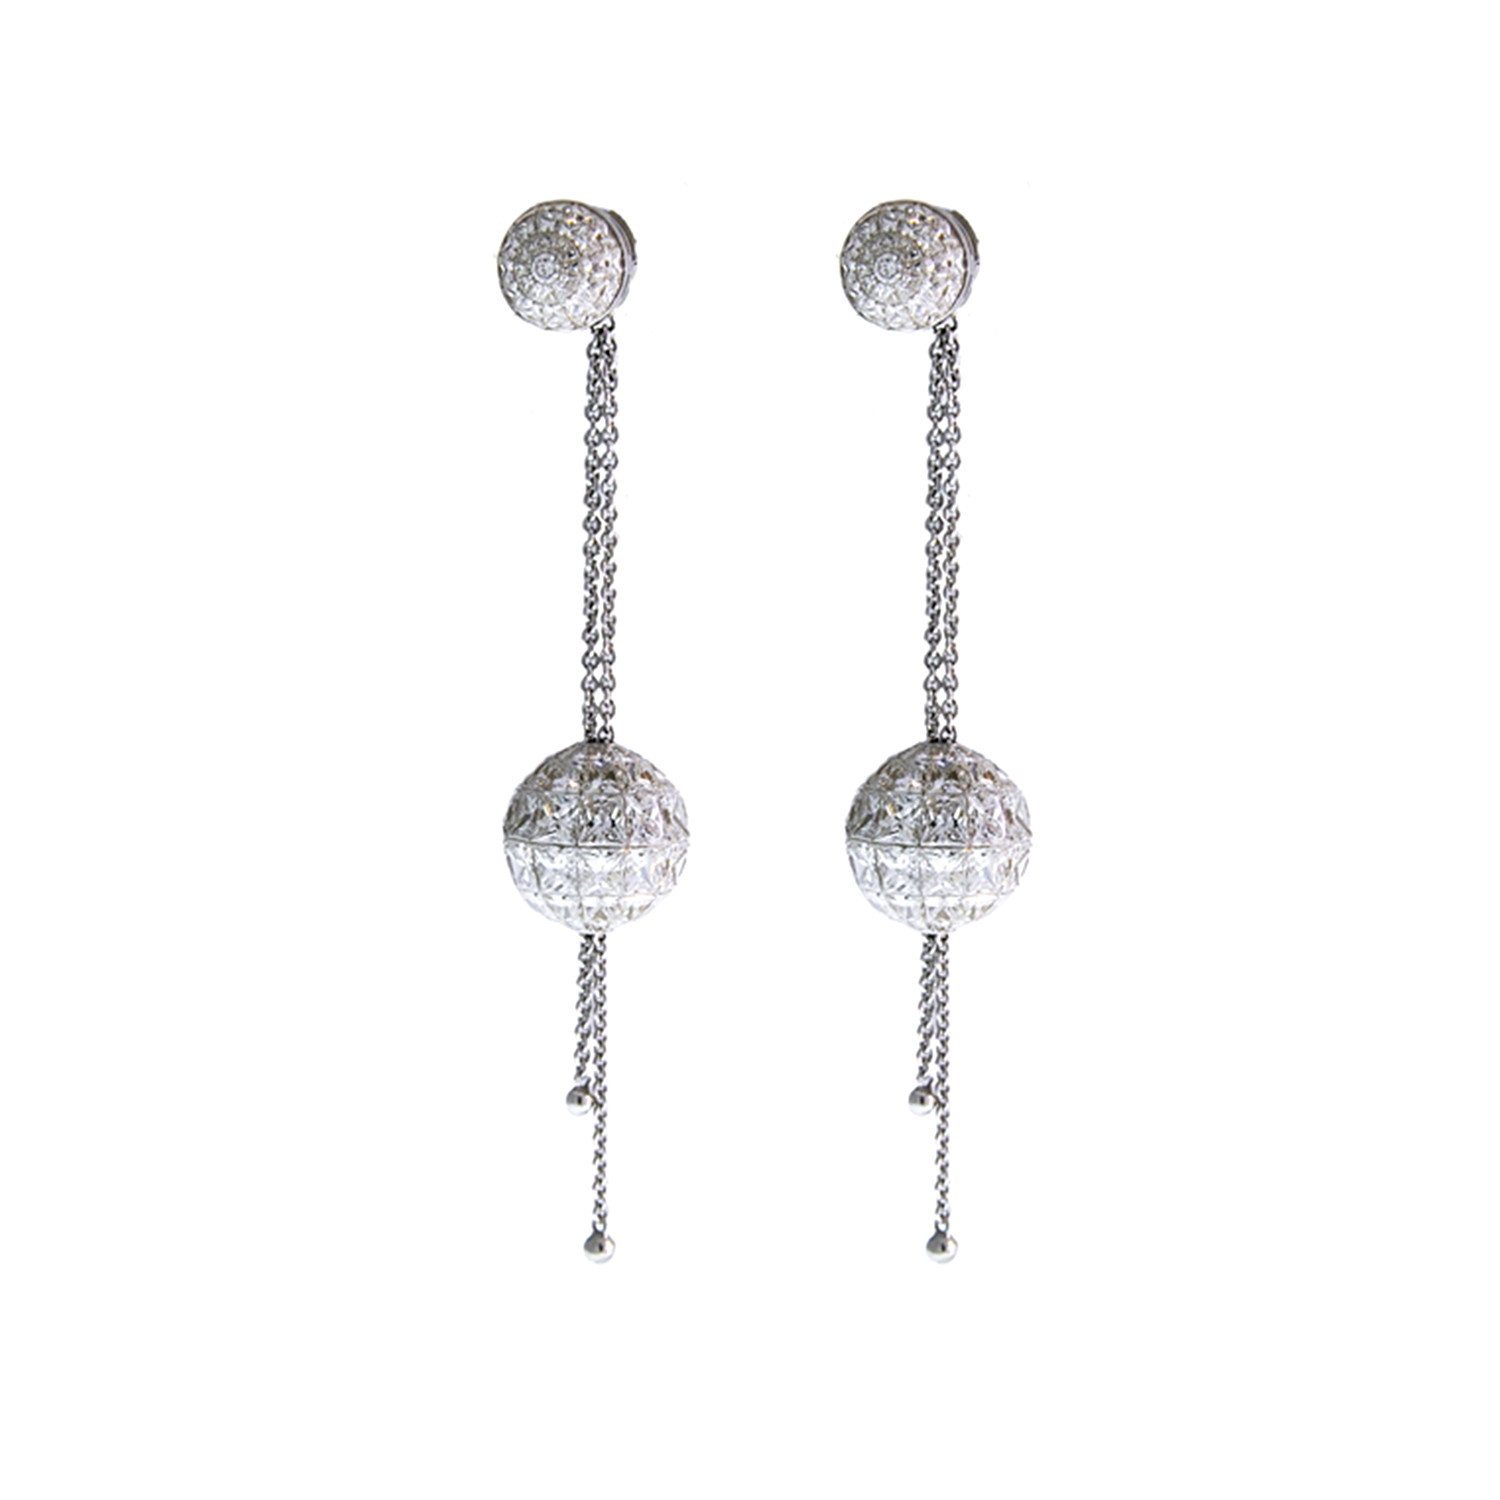 Jacob & Co. Ball Drop Earrings // White Gold - Jacob & Co - Touch of Modern